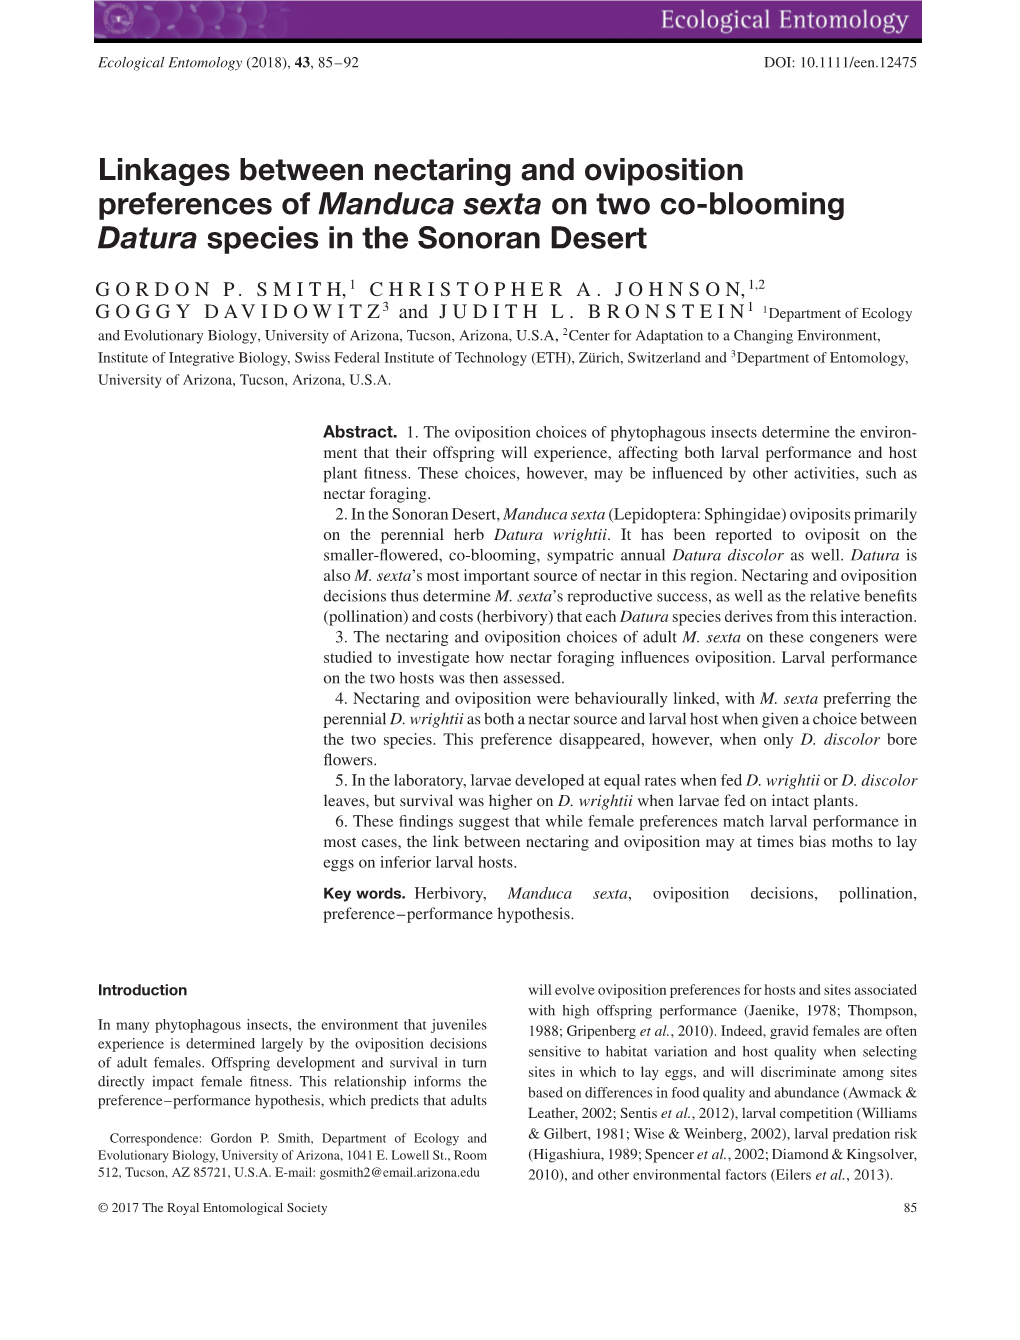 Linkages Between Nectaring and Oviposition Preferences of Manduca Sexta on Two Co-Blooming Datura Species in the Sonoran Desert